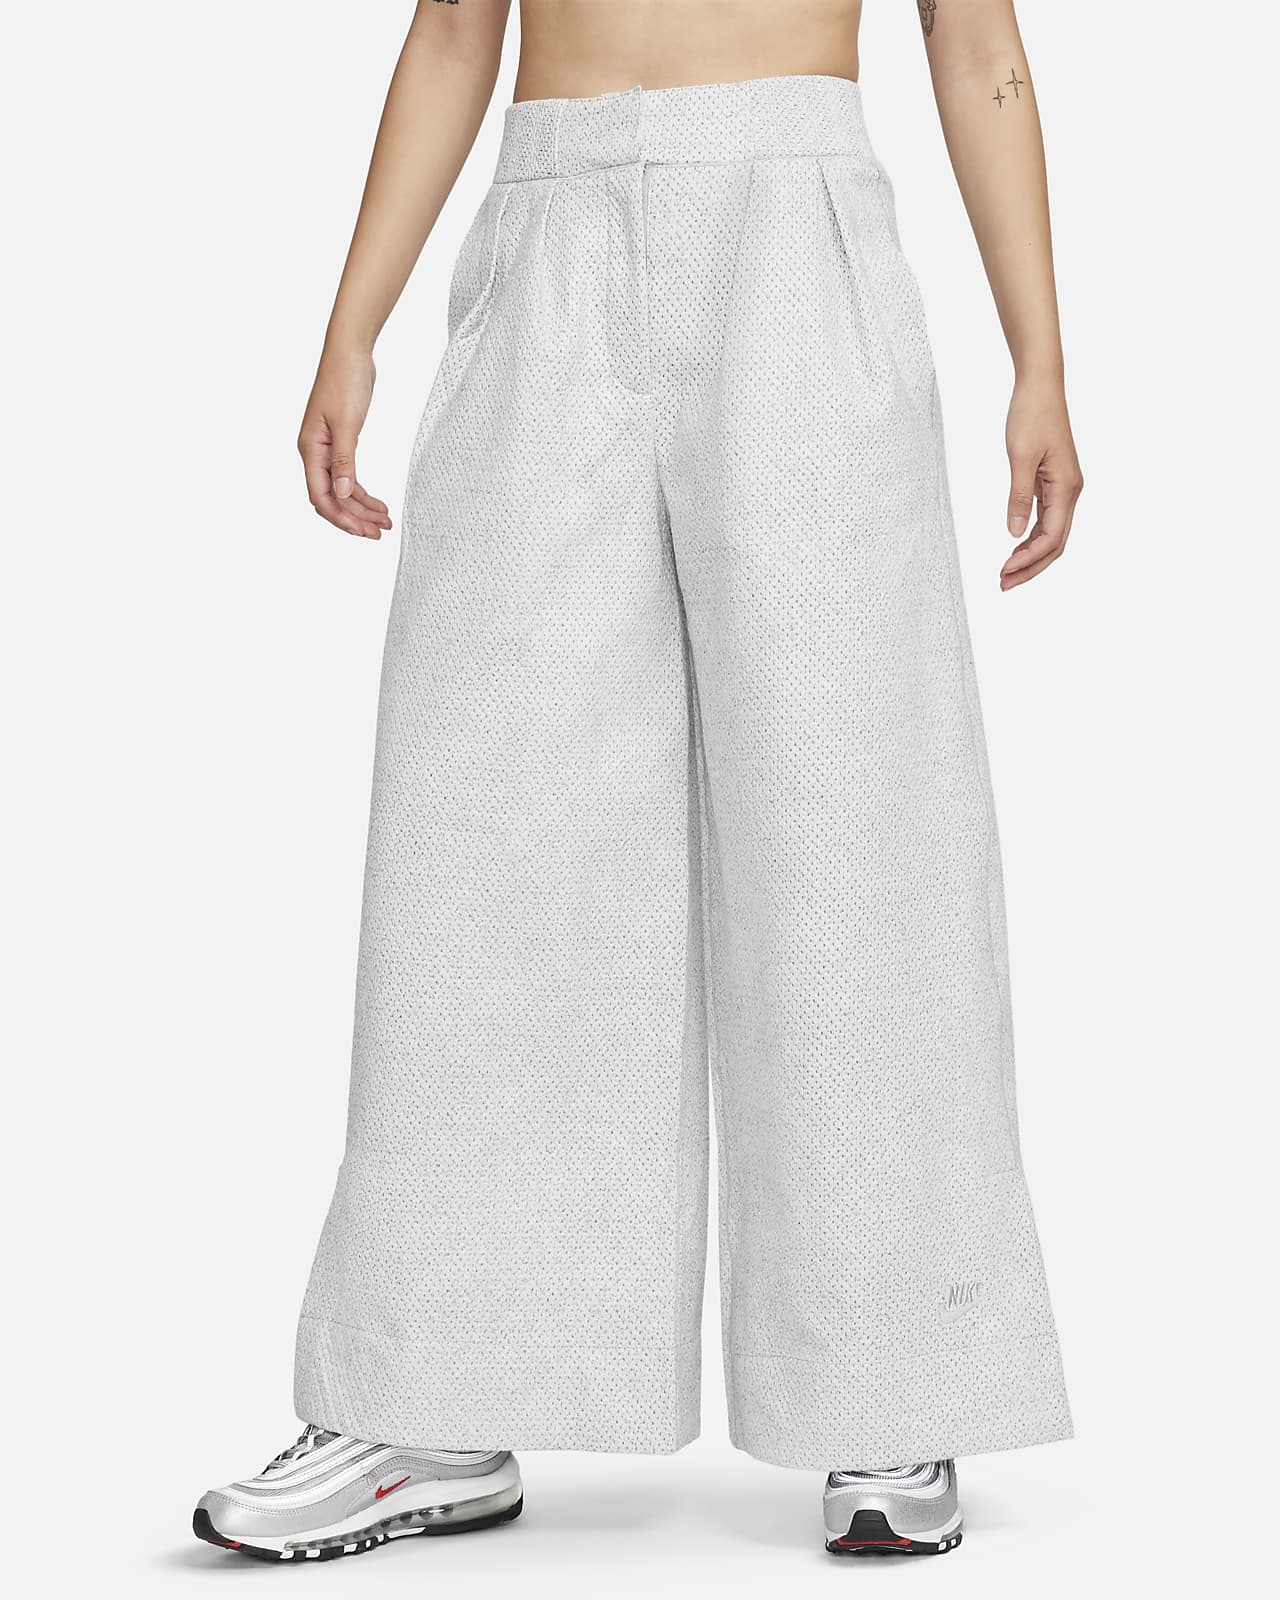 Lucy  White High Waisted Kick Flare Trousers  Trousers  Miss G Couture